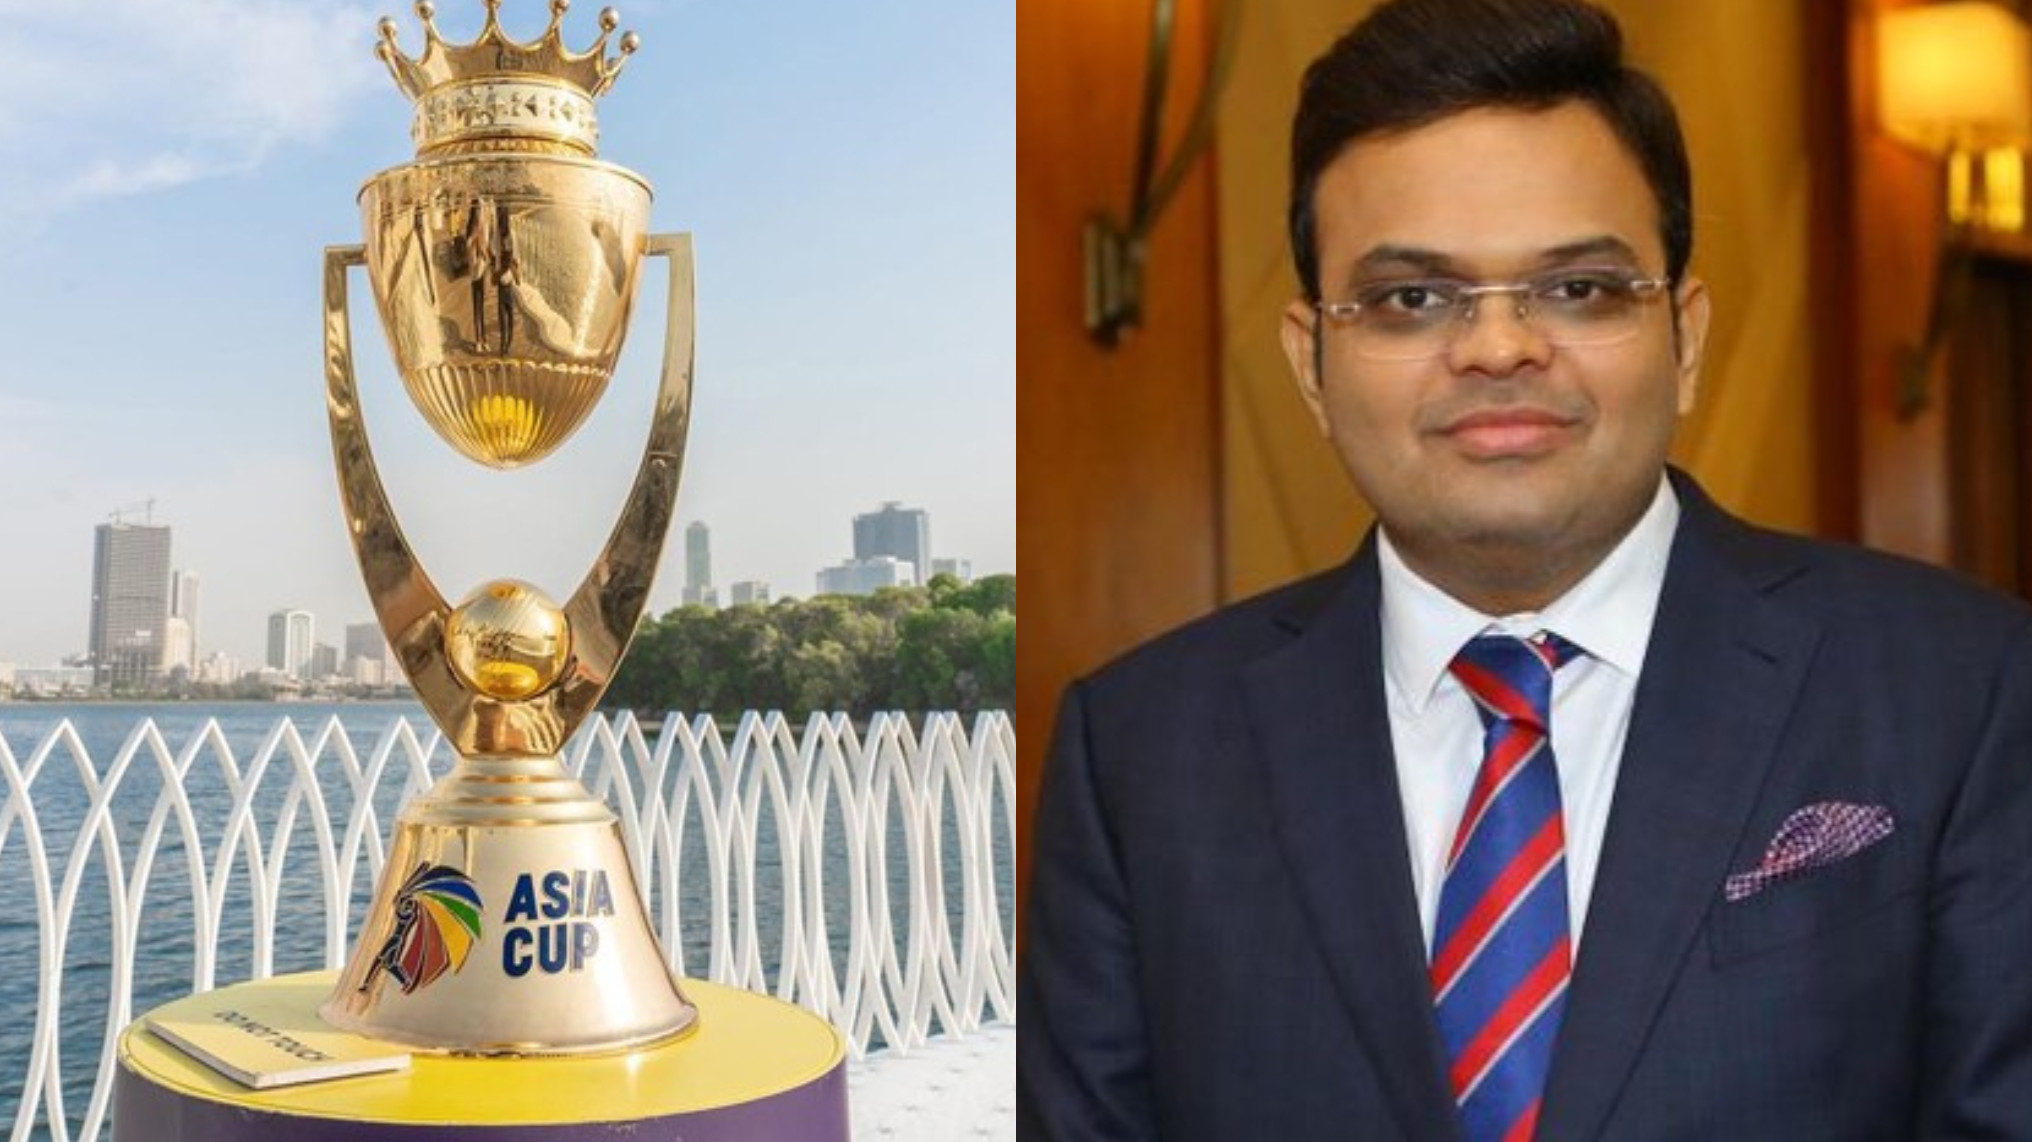 Jay Shah says Asia Cup venue to be decided after the IPL 2023 final- Report